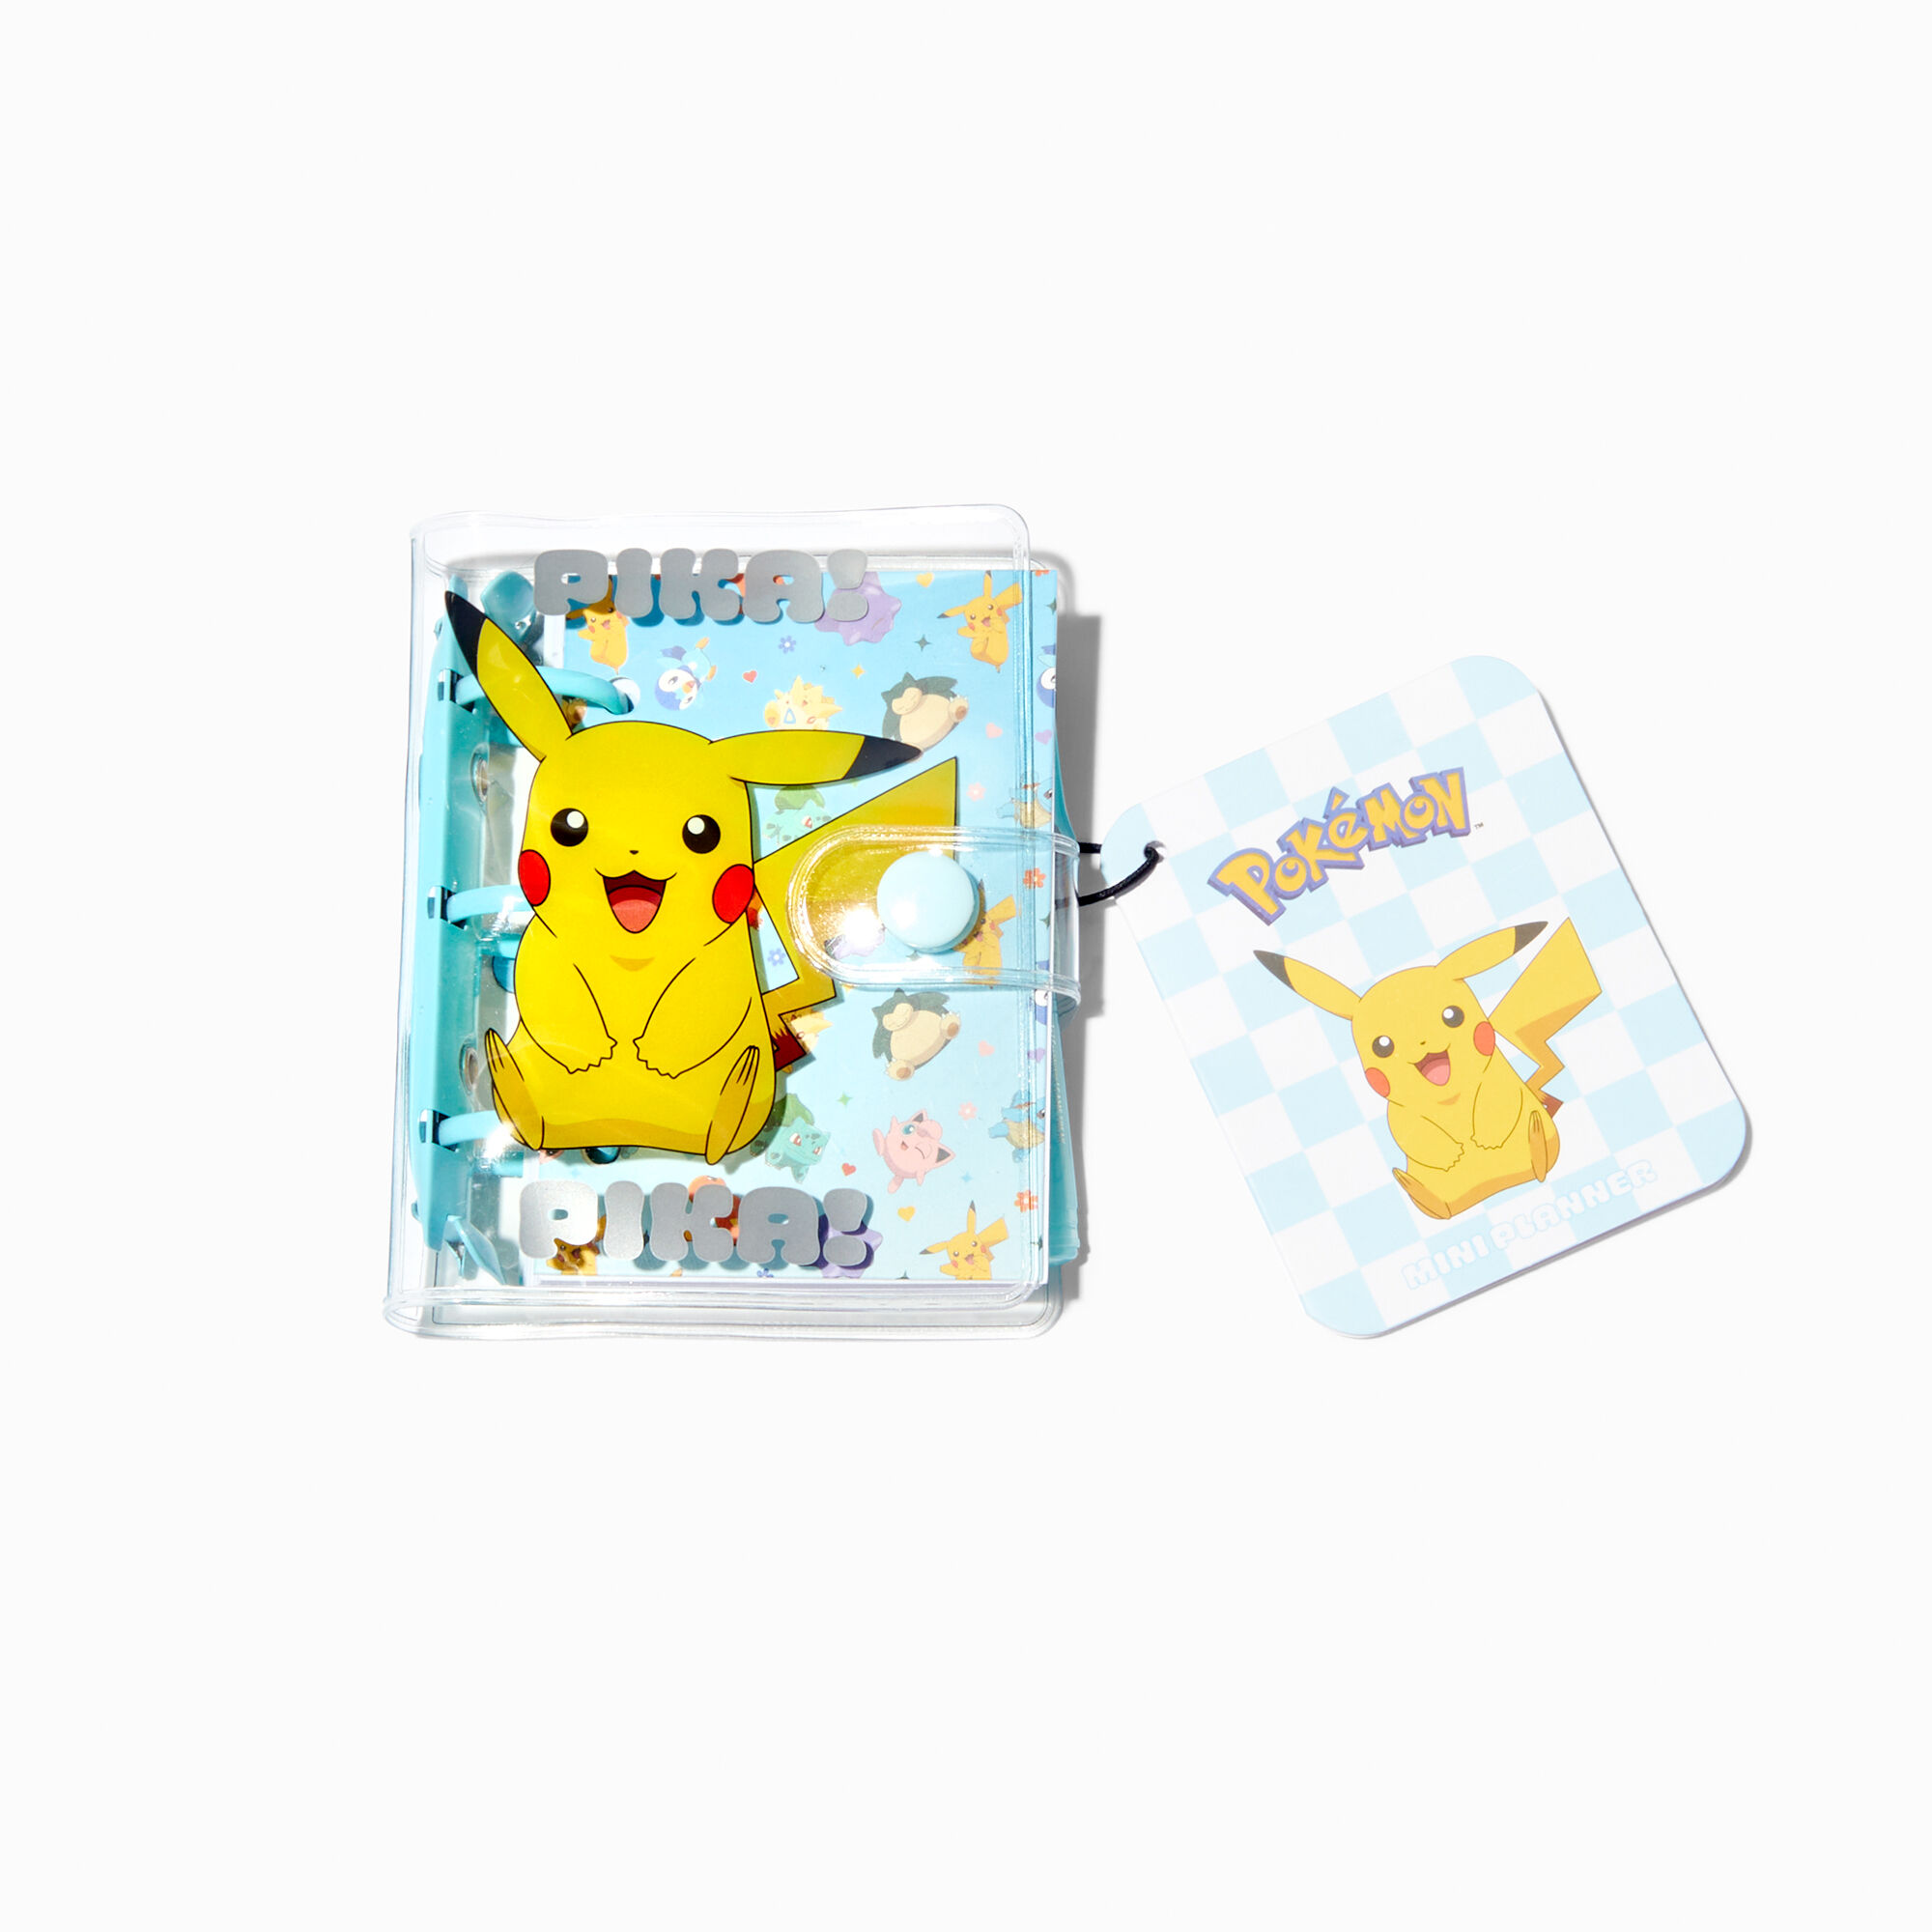 View Claires Pokémon Pikachu Day Planner And Pen information